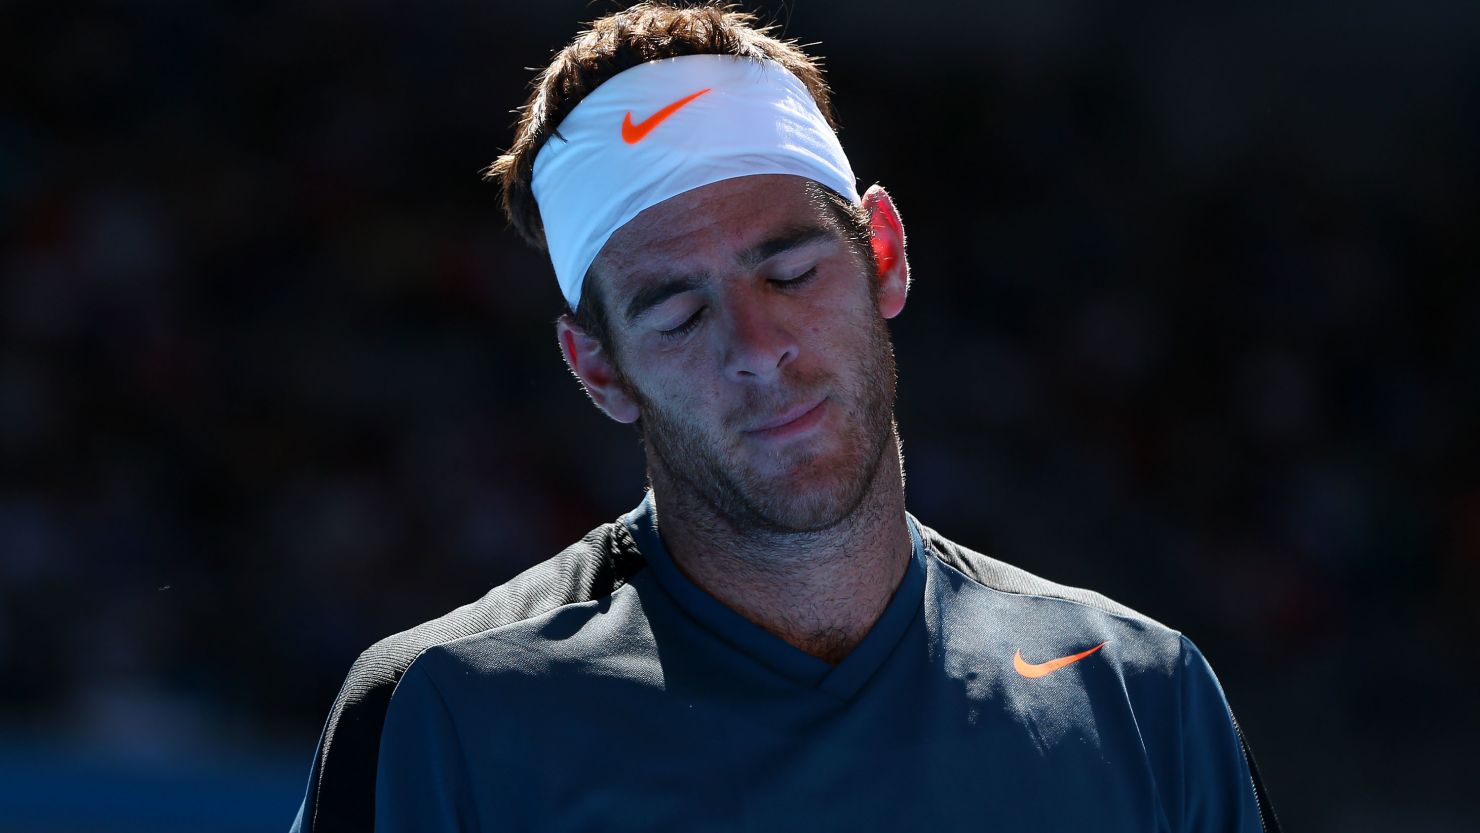 Juan Martin del Potro's Australian Open ended on Saturday when he was beaten by France's Jeremy Chardy in the third round.